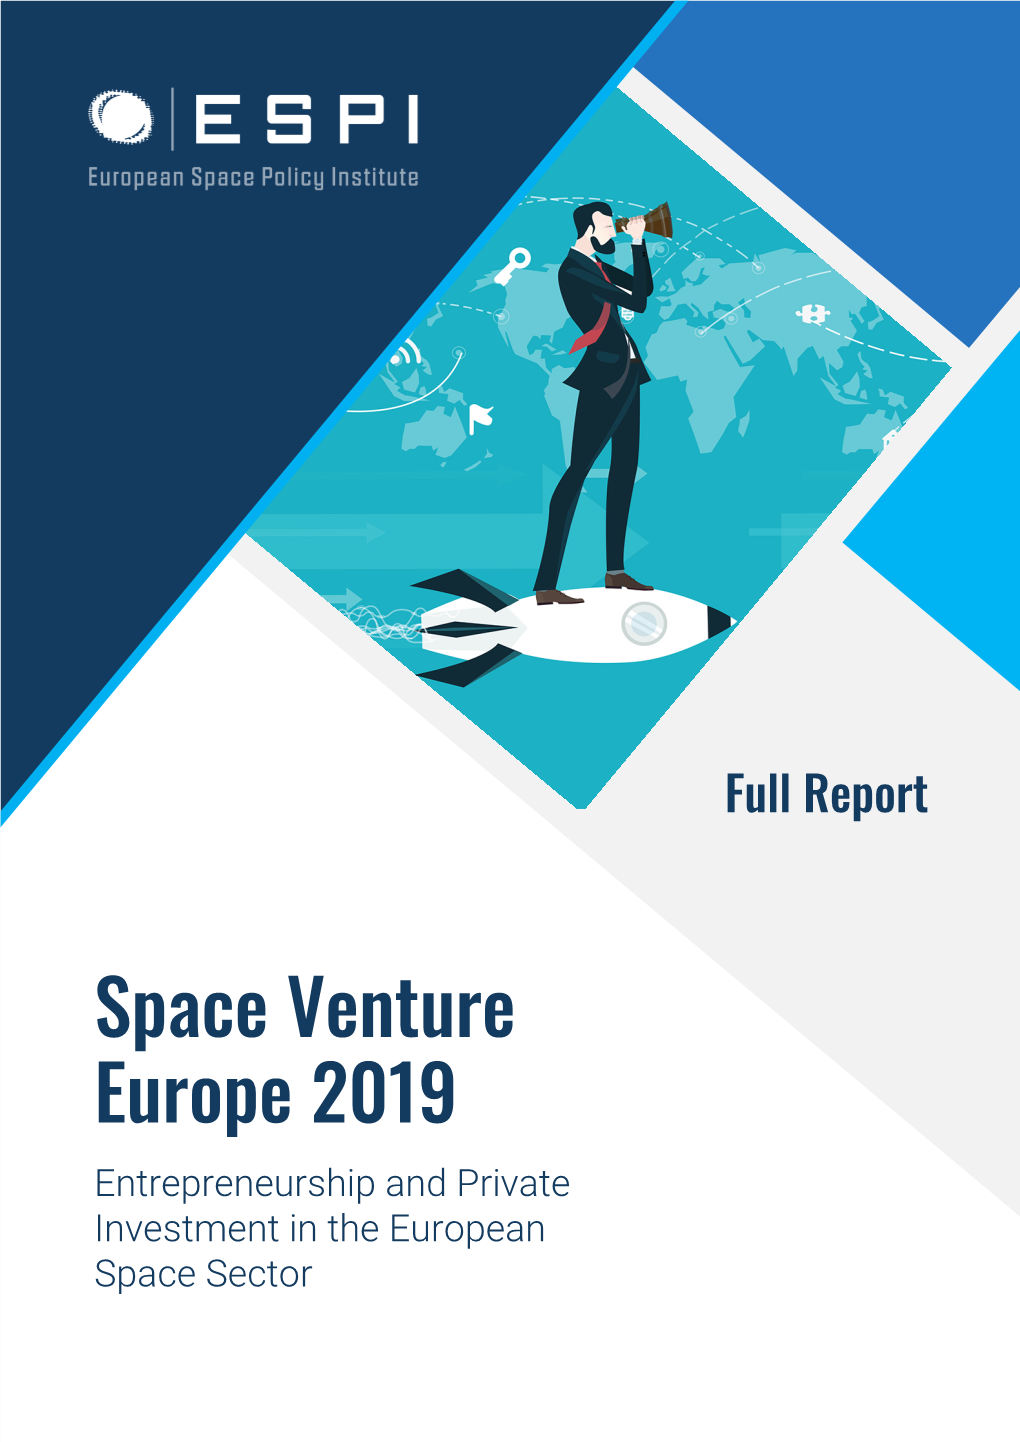 Space Venture Europe 2019 Entrepreneurship and Private Investment in the European Space Sector